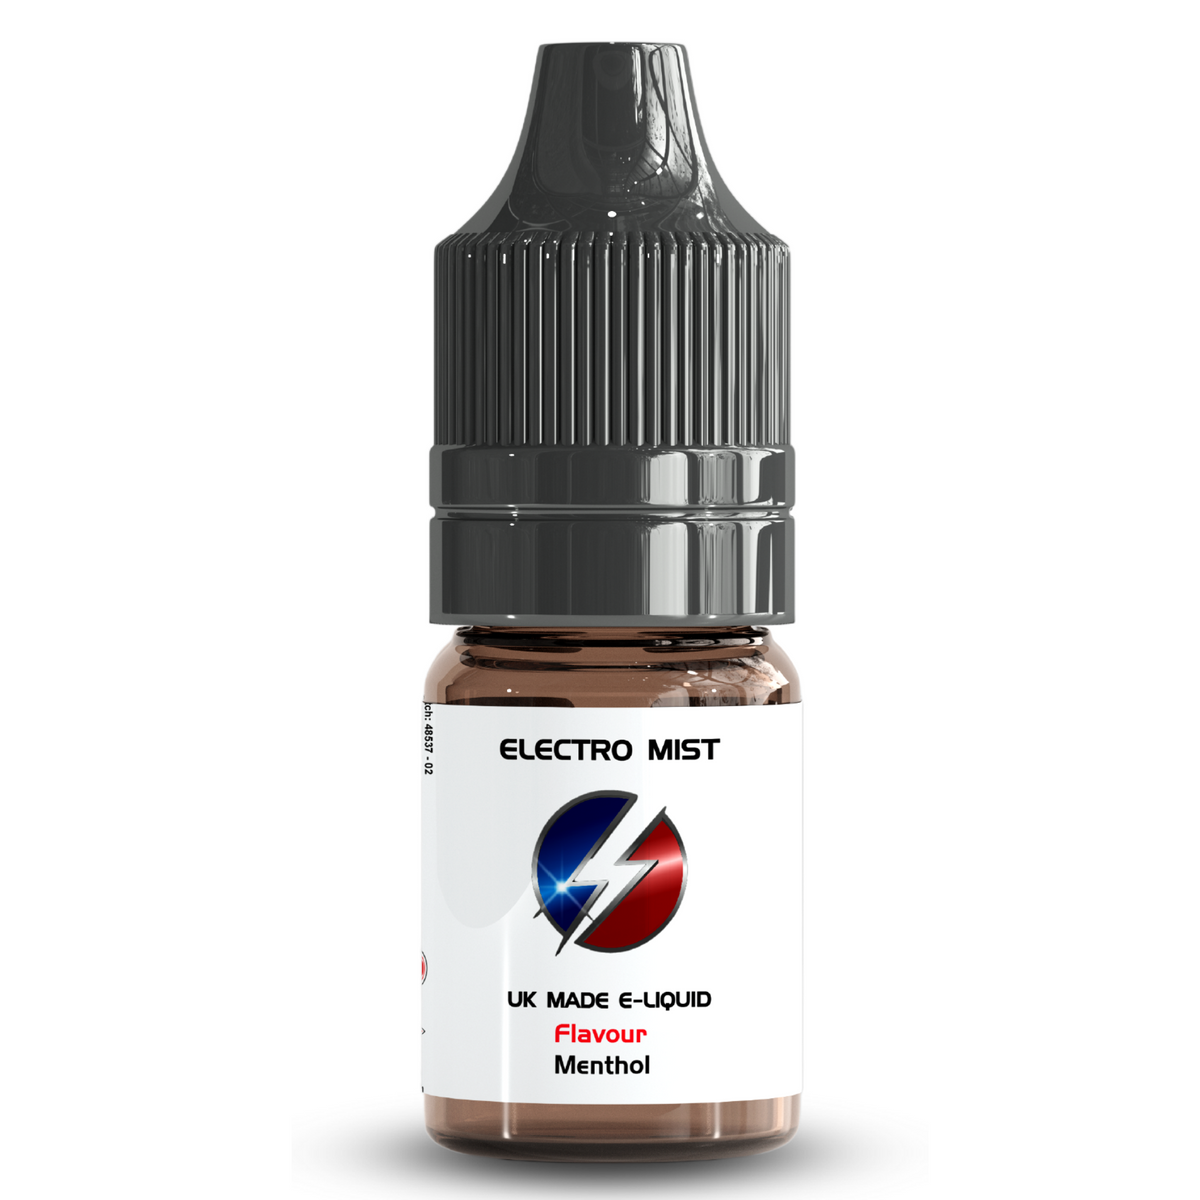 Electromist, the e-liquid brand you can trust. Get your taste buds ready for a flavour sensation, Menthol. Nicotine Content: 3mg/6mg/12mg. Products may contain nicotine. For over 18s Only ejuice, vape pen, eliquid, e cigarette, 10ml, vaping, cloud, PG, VG, 60/40, vape liquid, Flavour